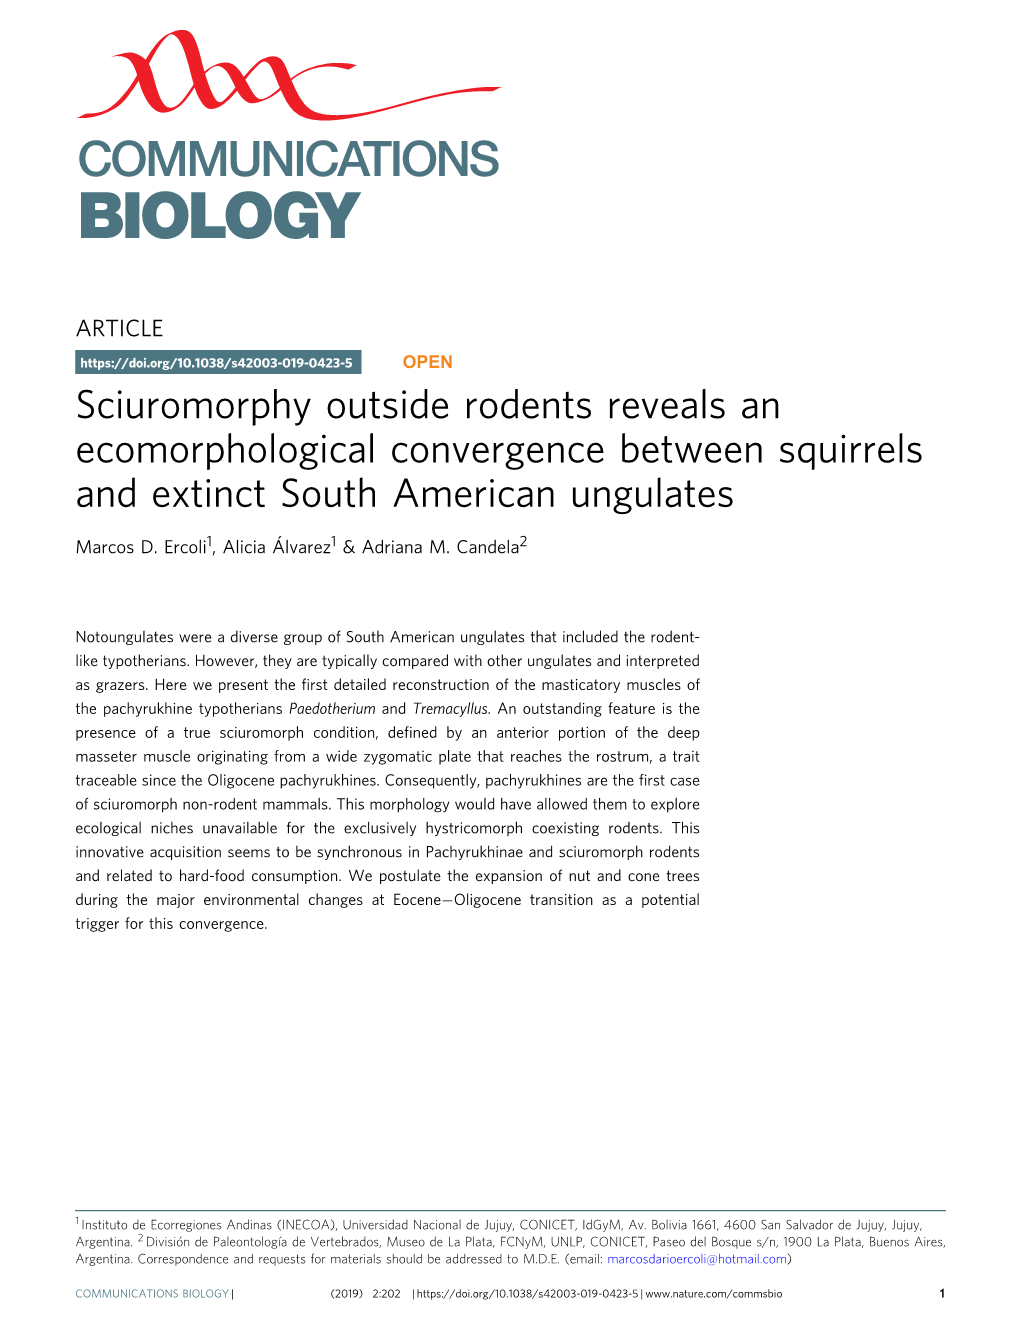 Sciuromorphy Outside Rodents Reveals an Ecomorphological Convergence Between Squirrels and Extinct South American Ungulates